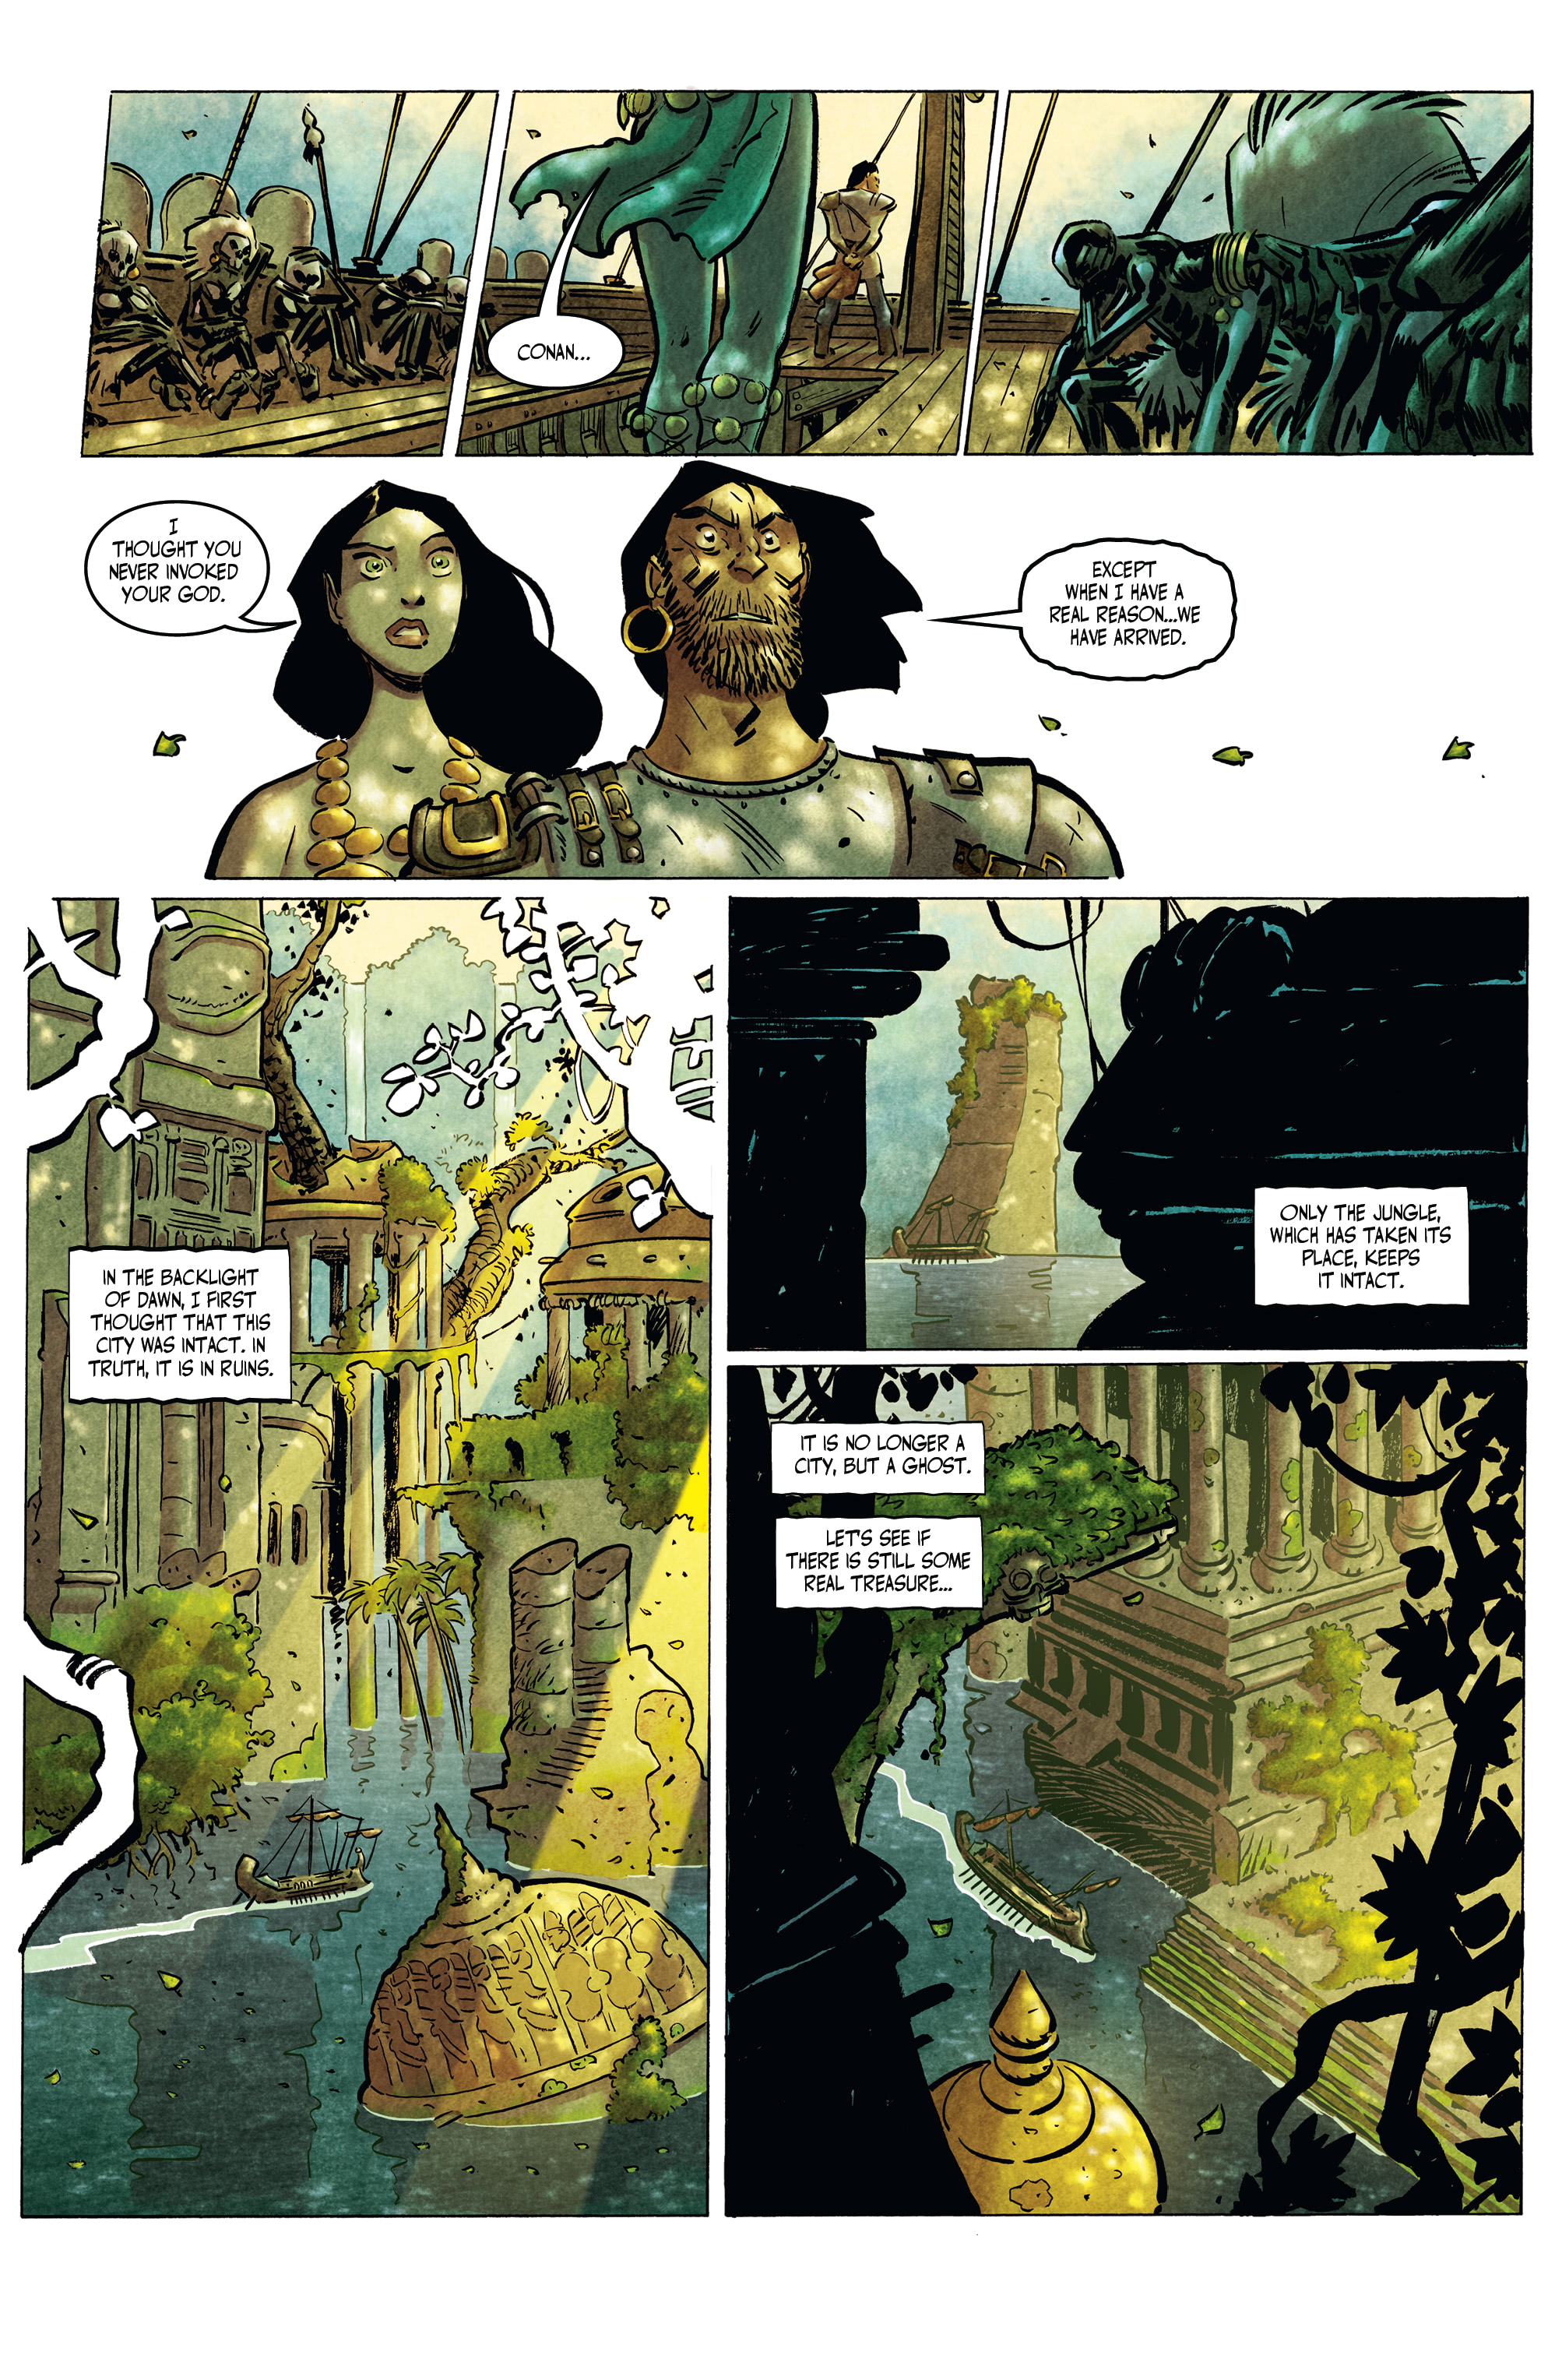 The Cimmerian: Queen of the Black Coast (2020-): Chapter 2 - Page 3